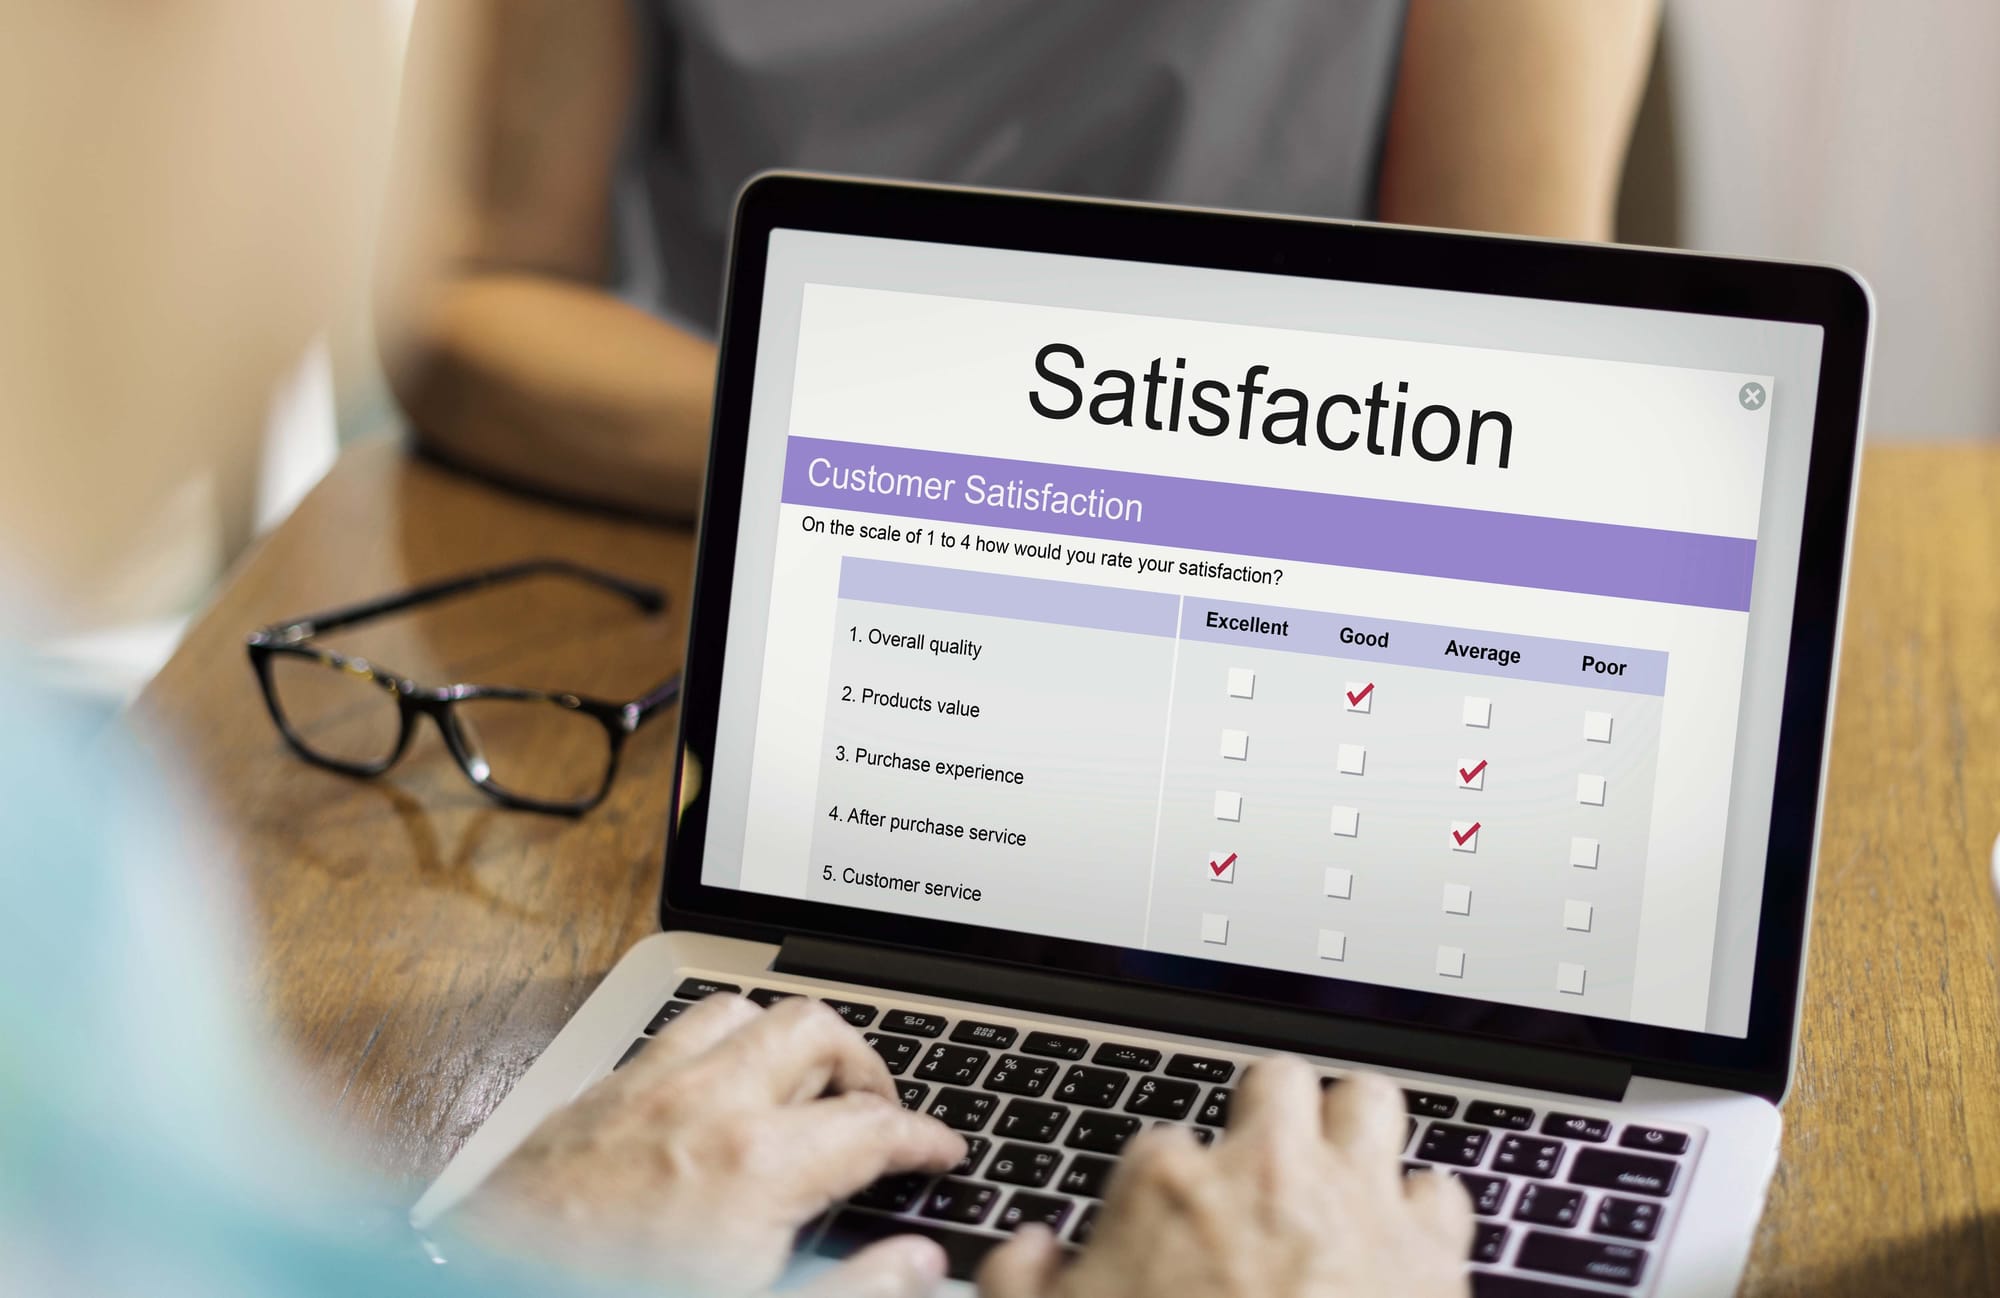 An image showing a laptop that says 'Satisfaction' on the screen.